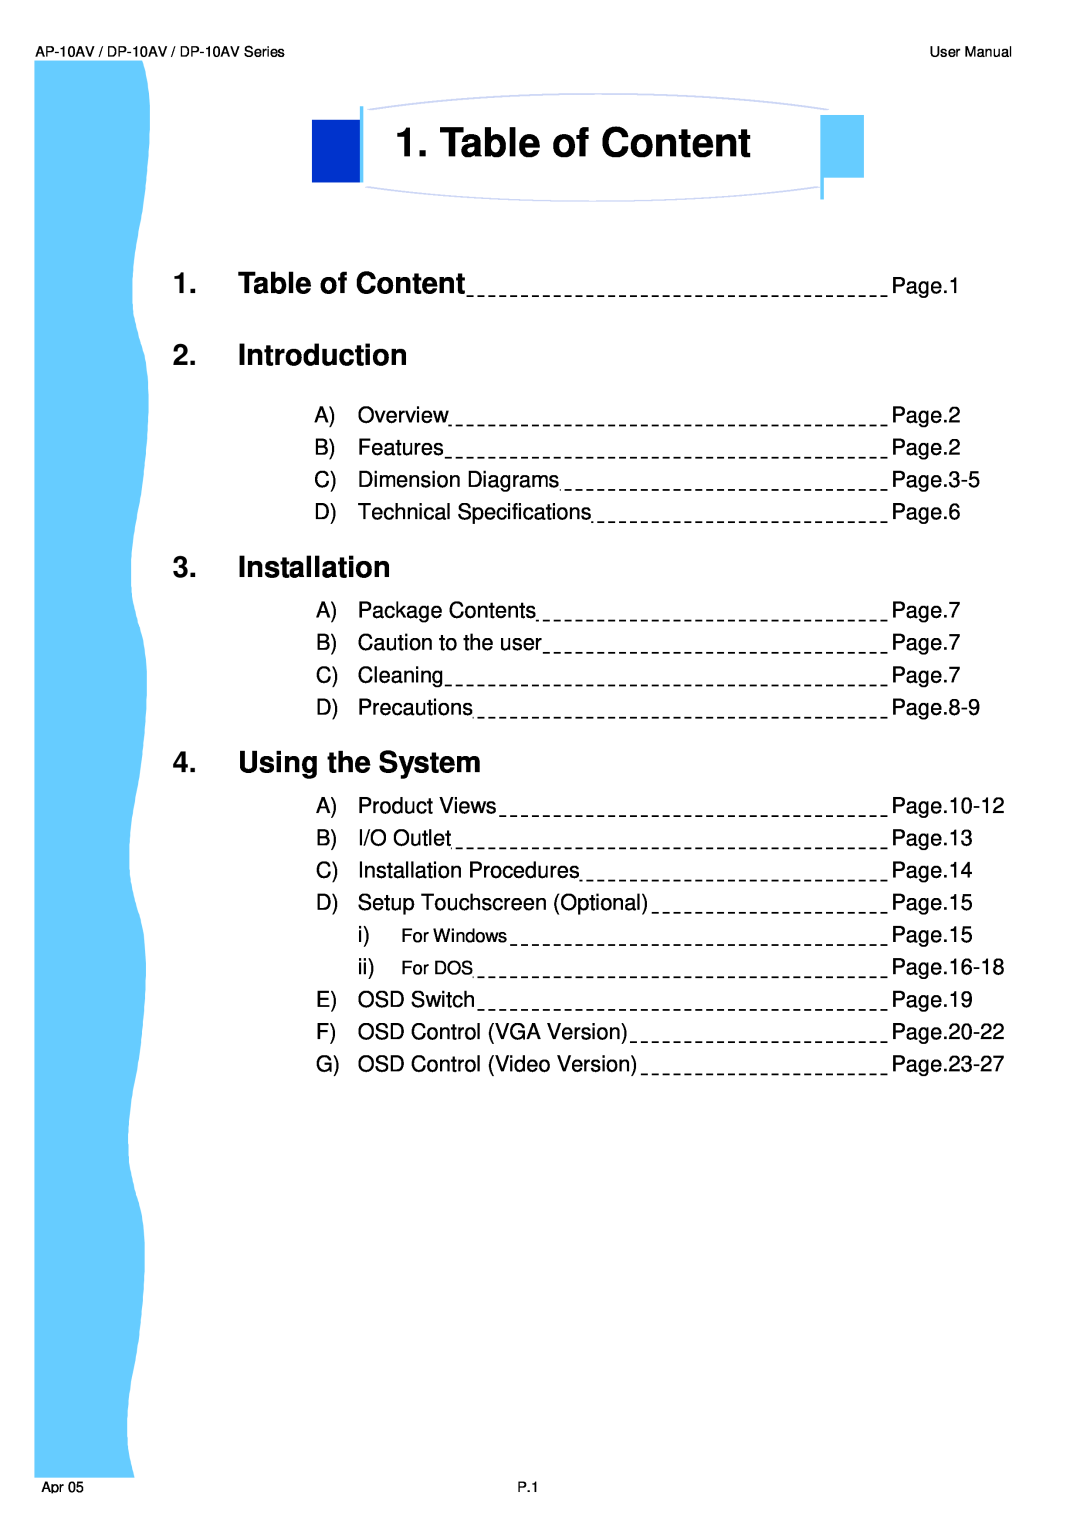 3M UMUV.10-045V2 user manual Table of Content, Introduction, Installation, Using the System 